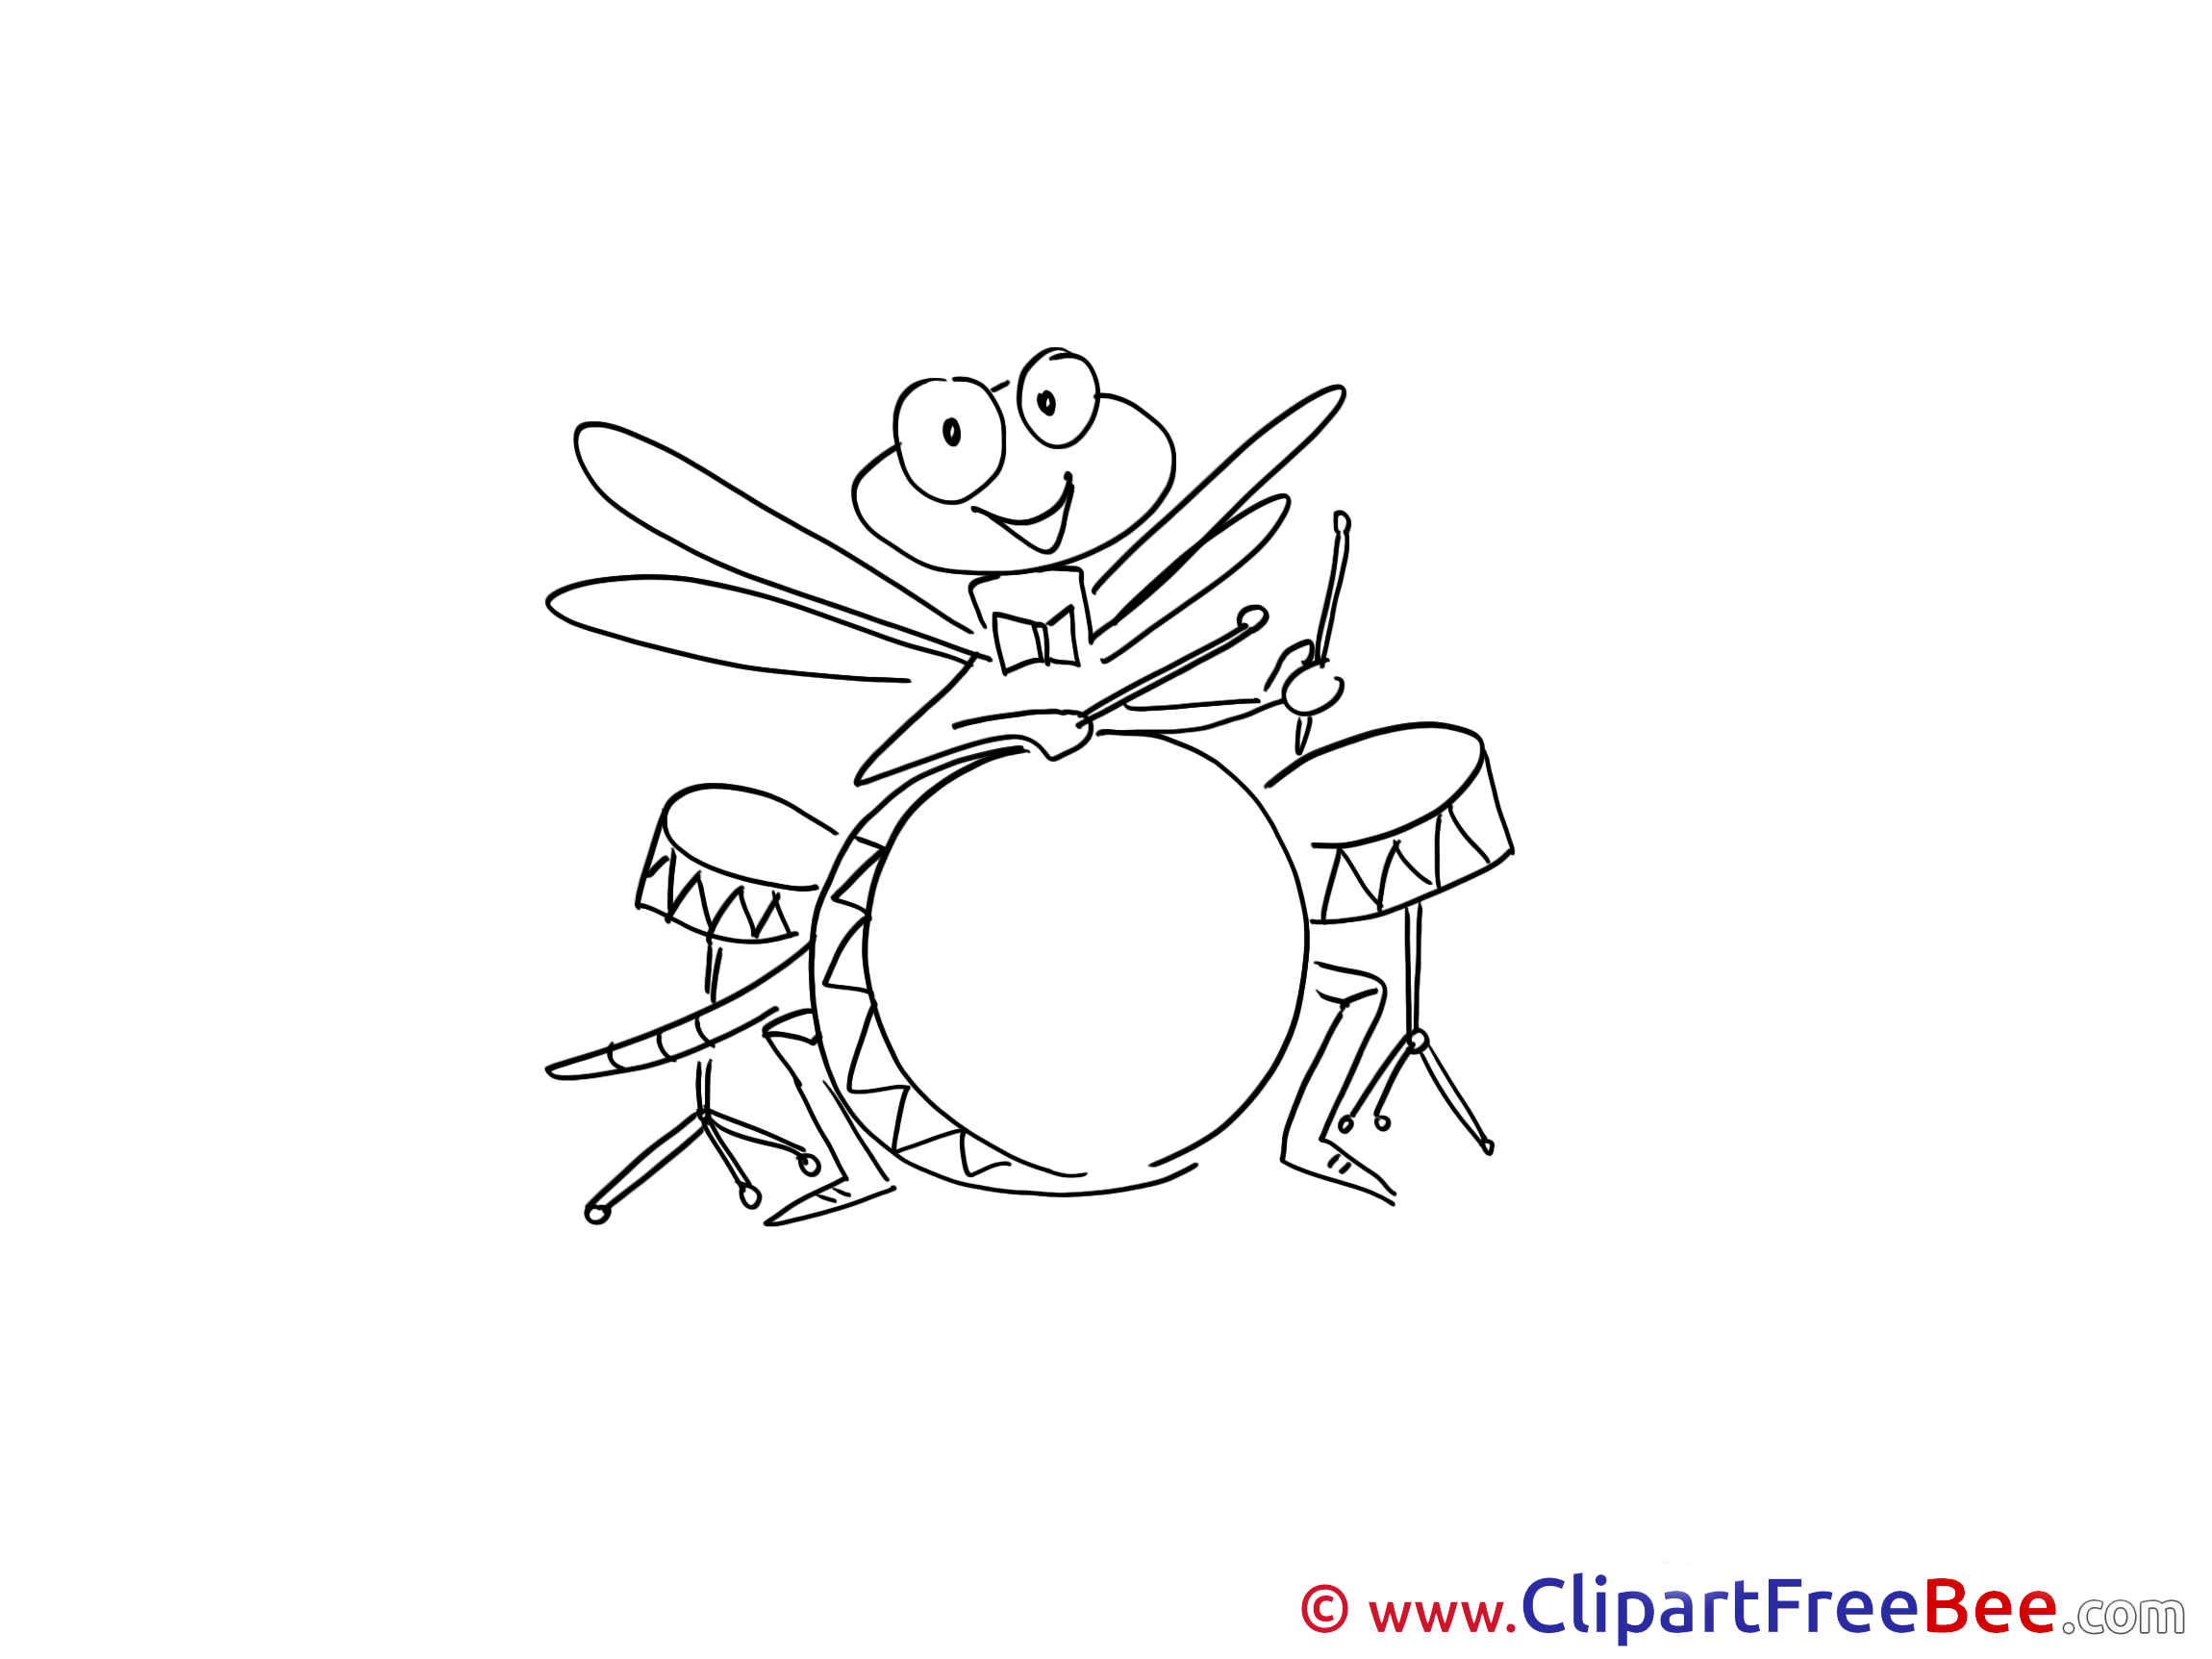 Dragonfly Drums Pics free download Image